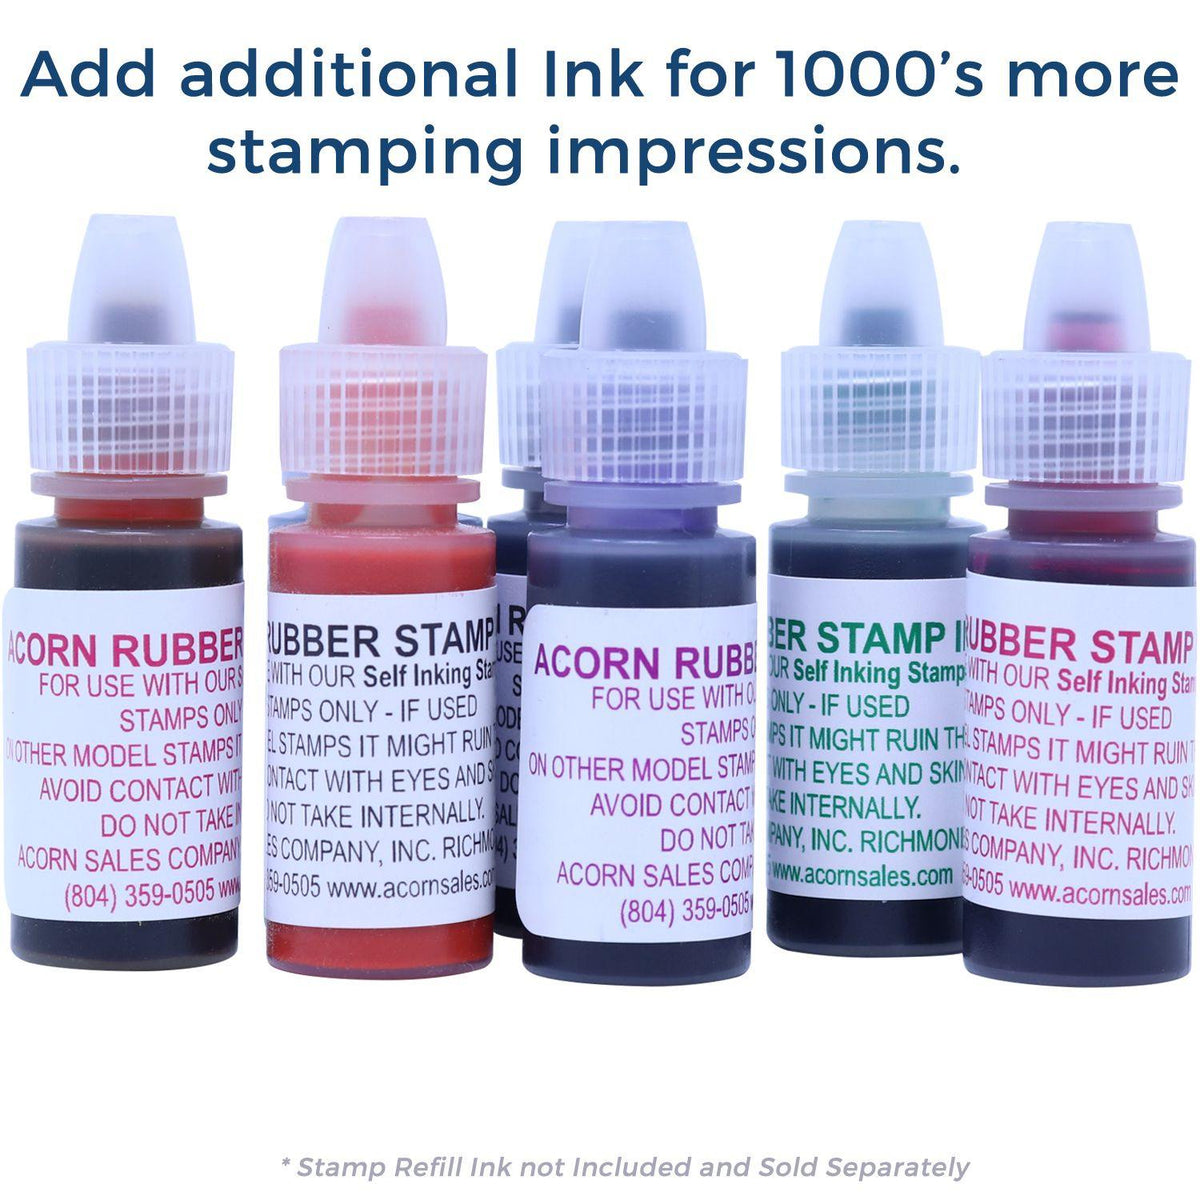 Slim Pre-Inked Bold Rough Draft Stamp - Engineer Seal Stamps - Brand_Slim, Impression Size_Small, Stamp Type_Pre-Inked Stamp, Type of Use_General, Type of Use_Office